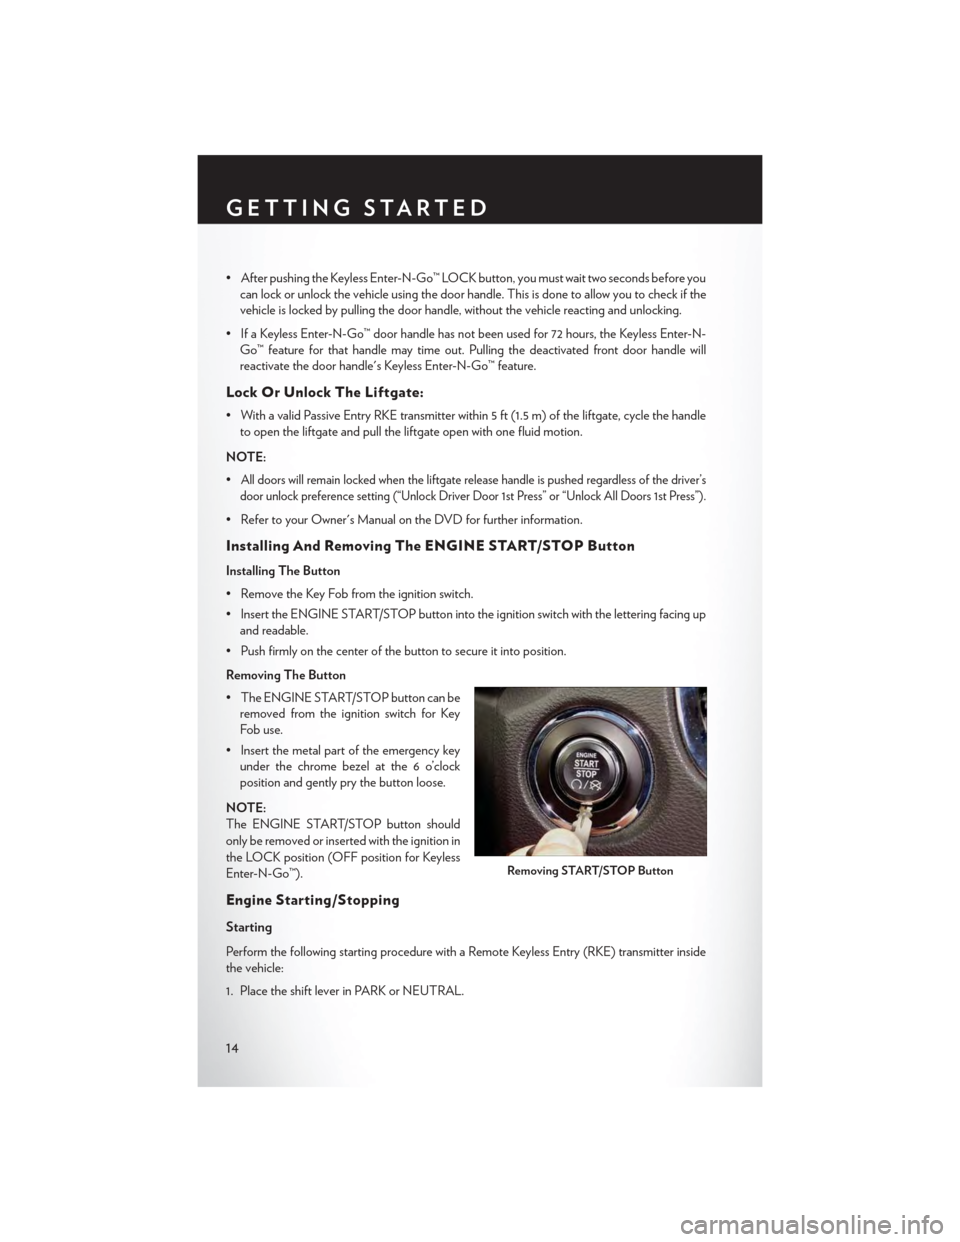 CHRYSLER TOWN AND COUNTRY 2015 5.G User Guide •AfterpushingtheKeylessEnter-N-Go™LOCKbutton,youmustwaittwosecondsbeforeyou
can lock or unlock the vehicle using the door handle. This is done to allow you to check if the
vehicle is locked by pul